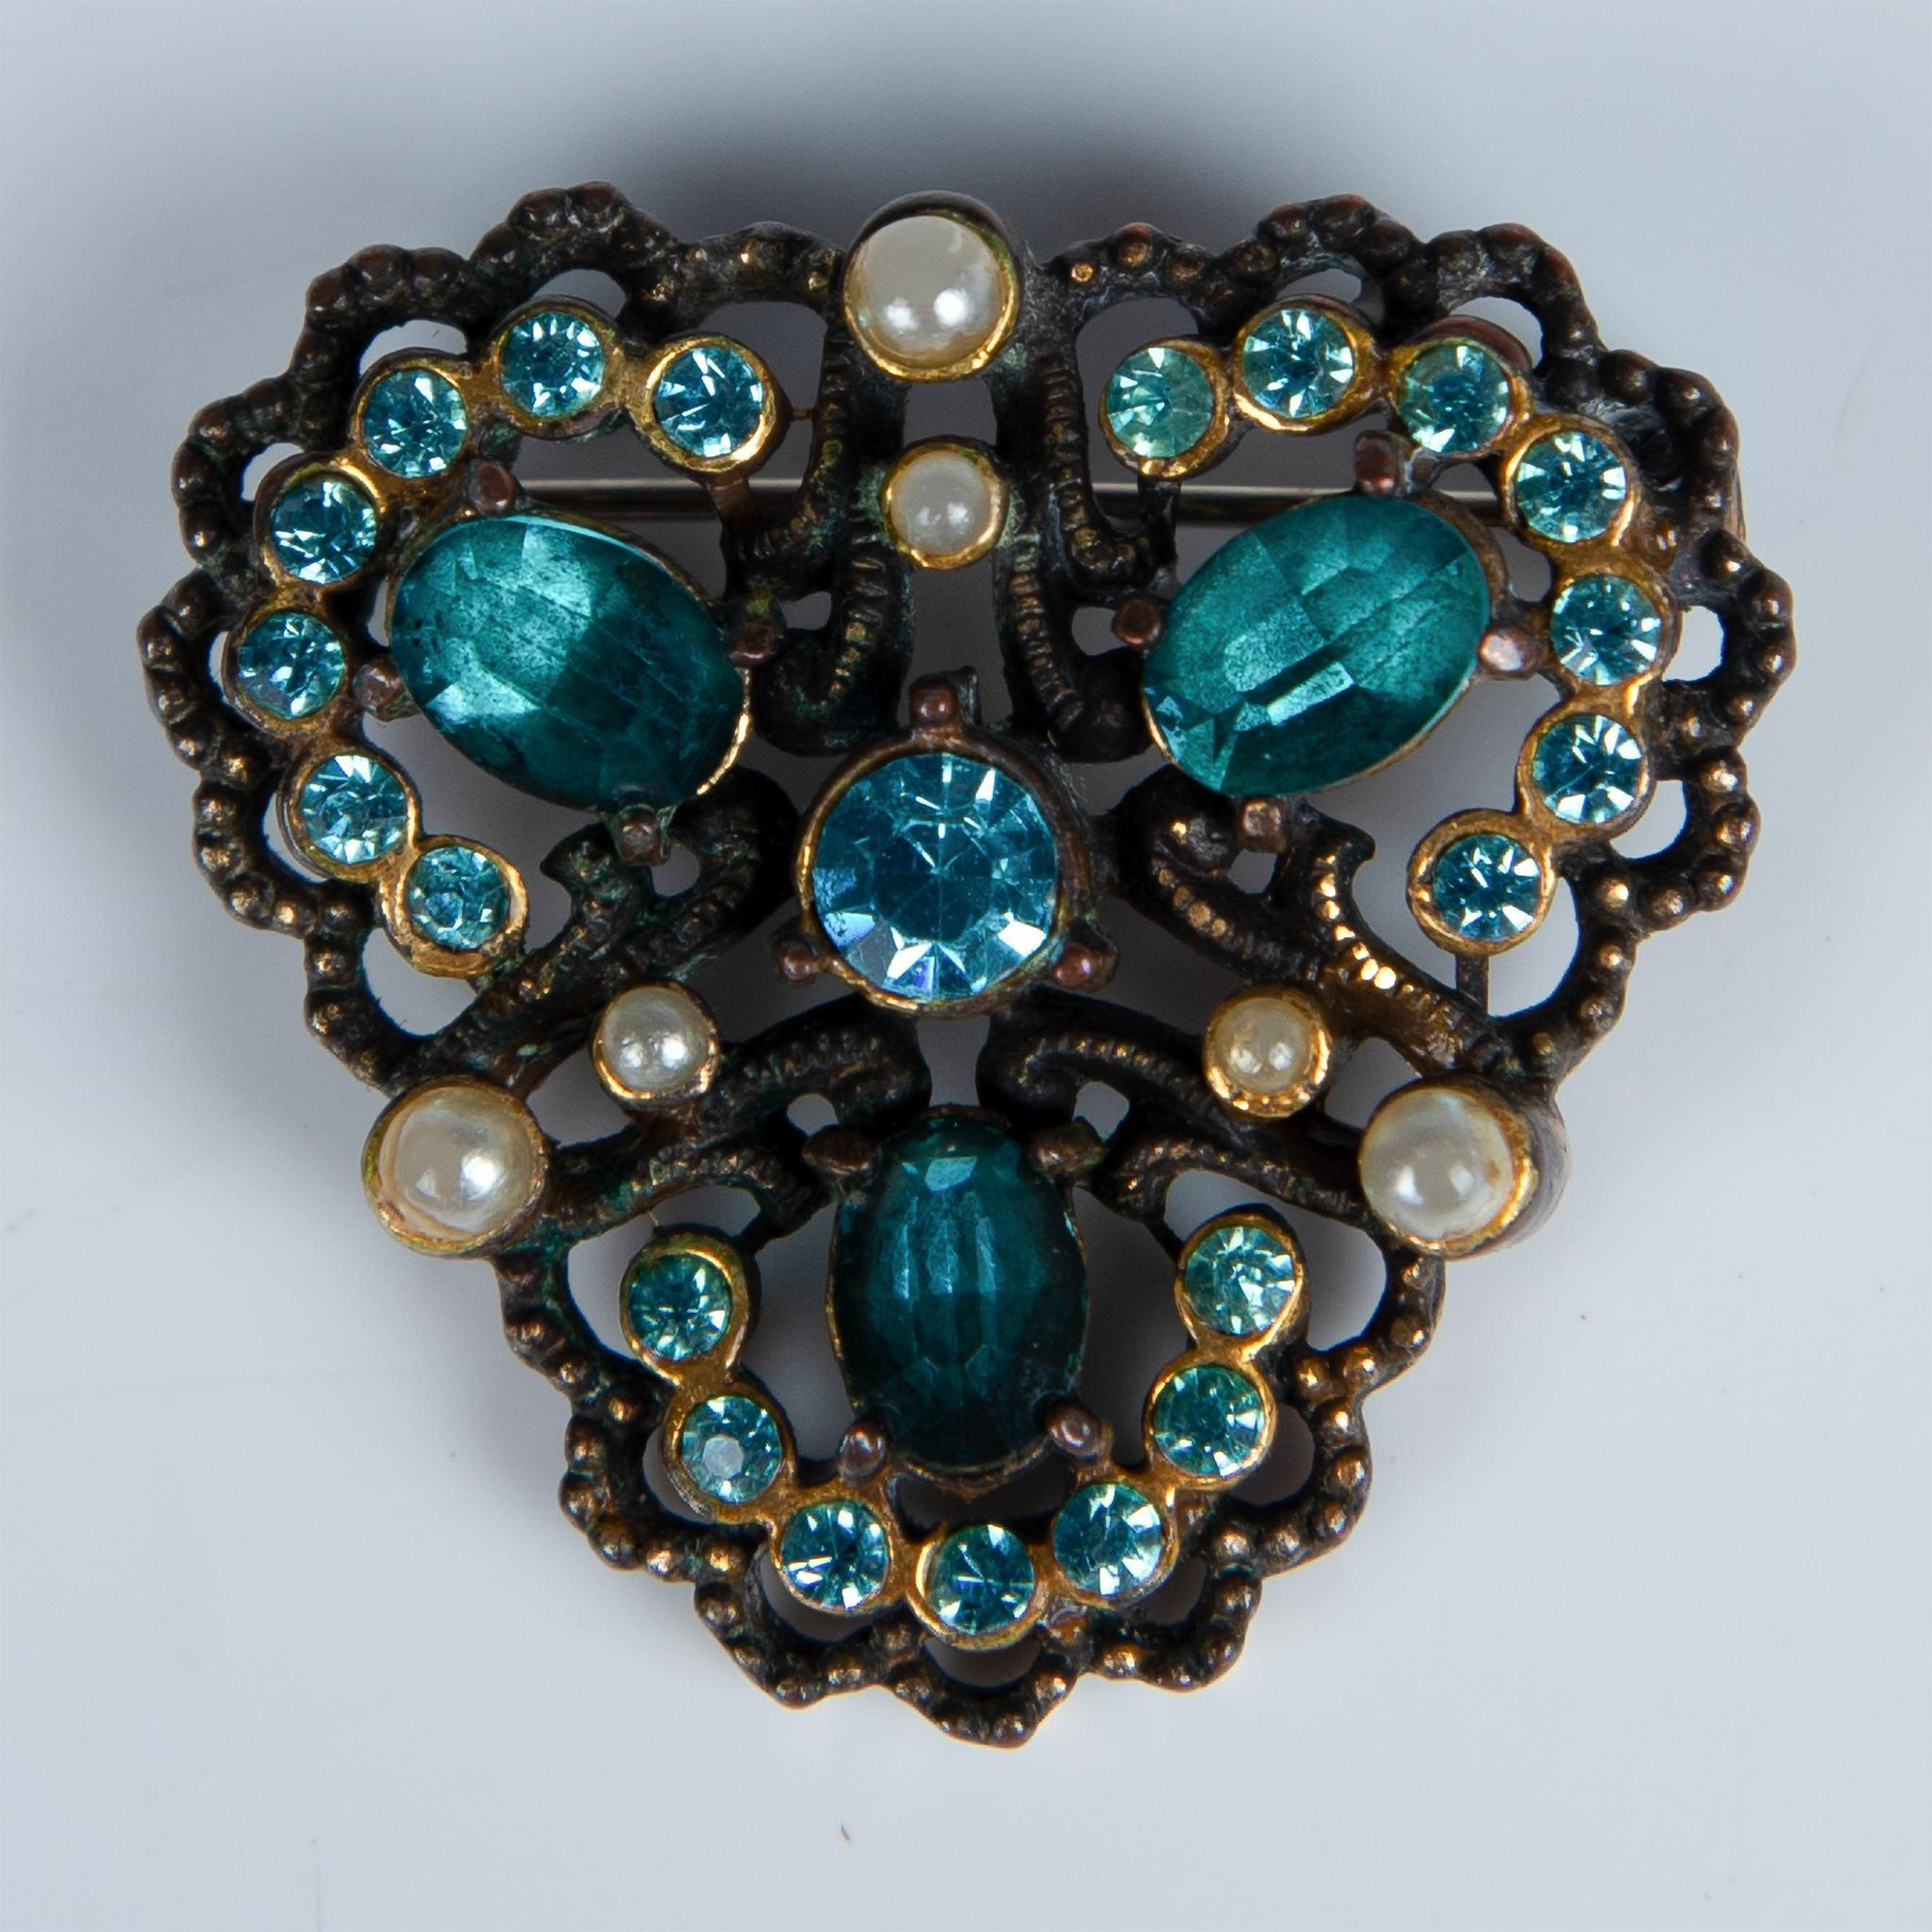 Vintage Small Blue Rhinestone and Faux Pearl Brooch